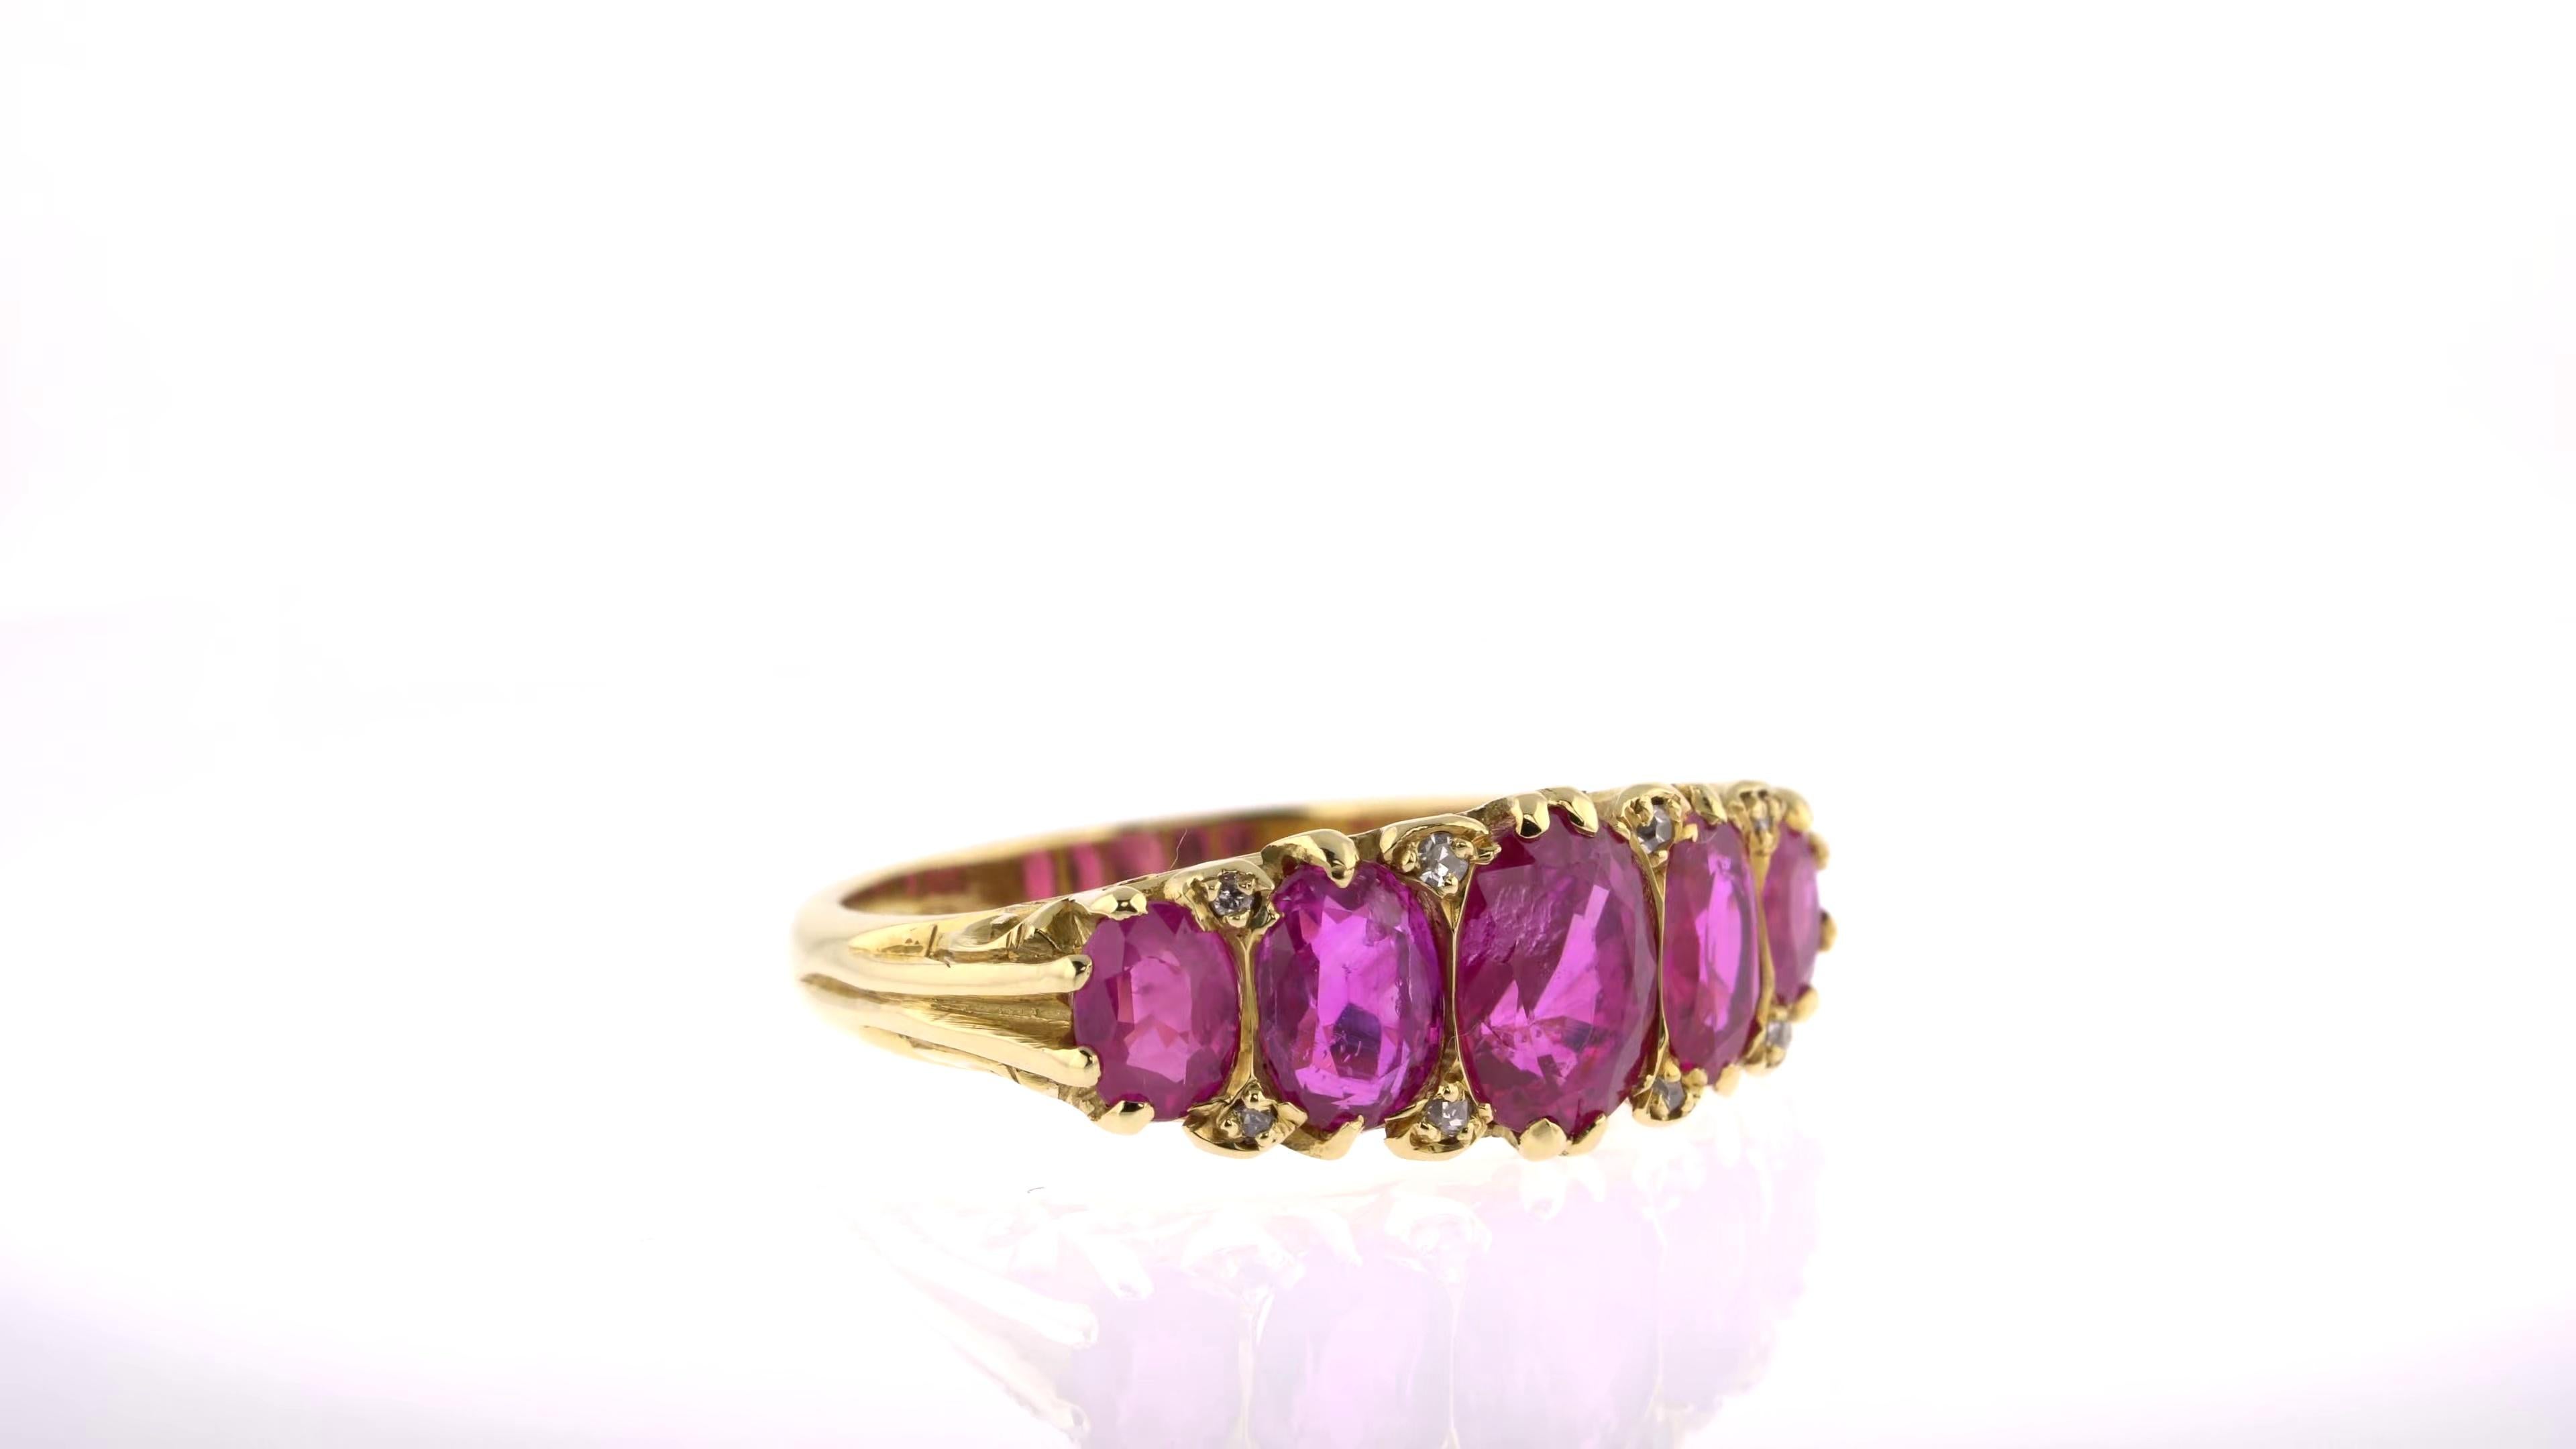 This feminine ring is a true one-off, handmade in our London atelier and featuring five rich red rubies. The stones are arranged along a broad yellow gold band, offsetting the rich colour of each oval cut ruby. The ring’s unique, vintage-style look